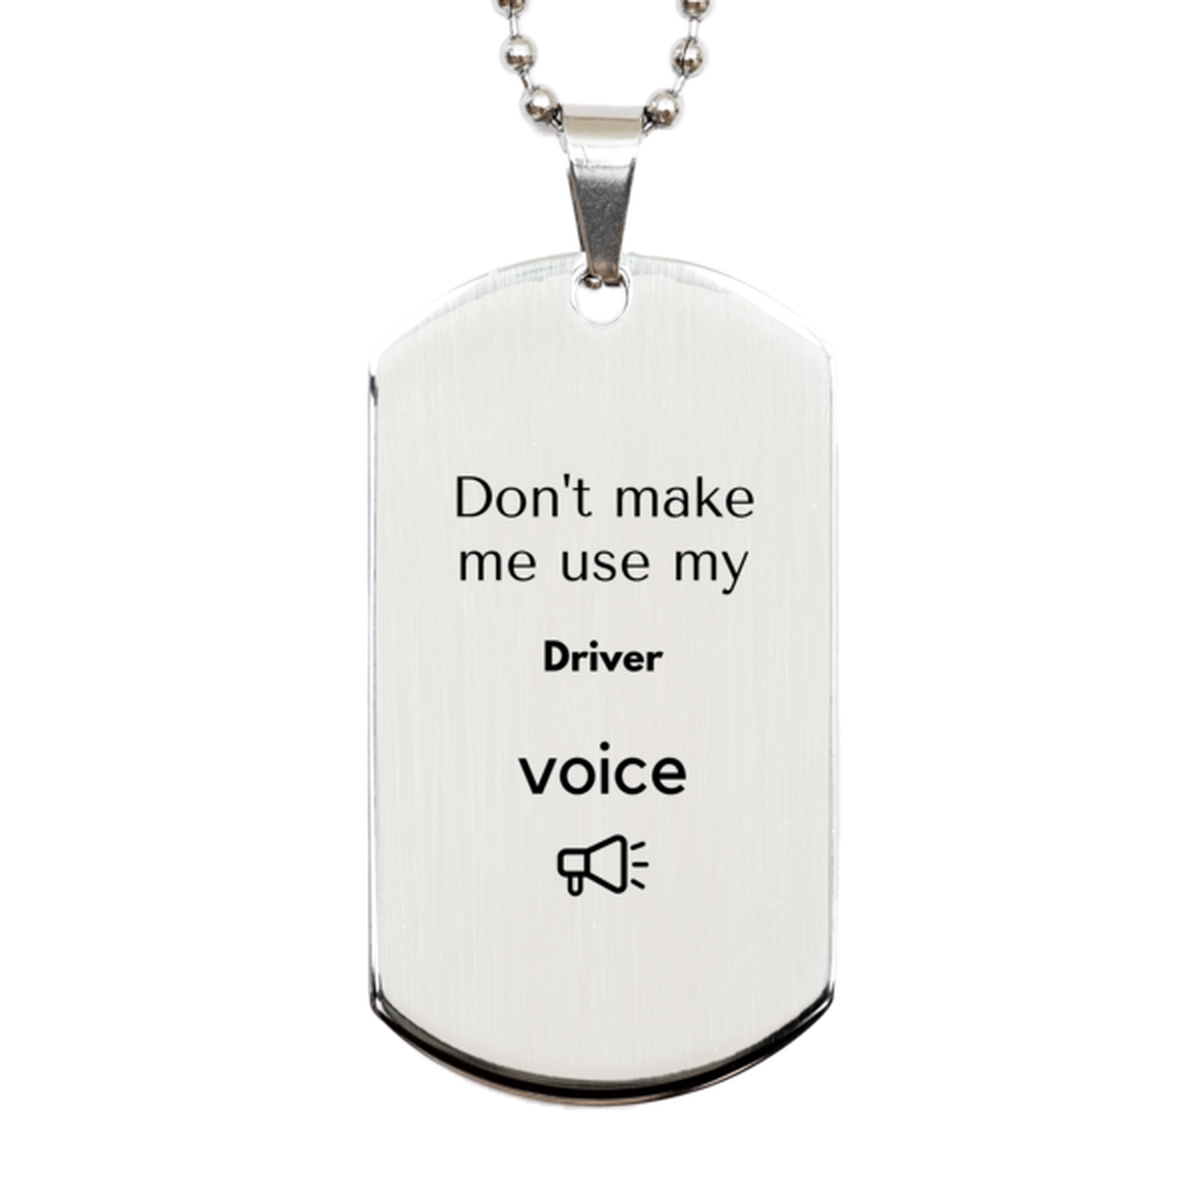 Don't make me use my Driver voice, Sarcasm Driver Gifts, Christmas Driver Silver Dog Tag Birthday Unique Gifts For Driver Coworkers, Men, Women, Colleague, Friends